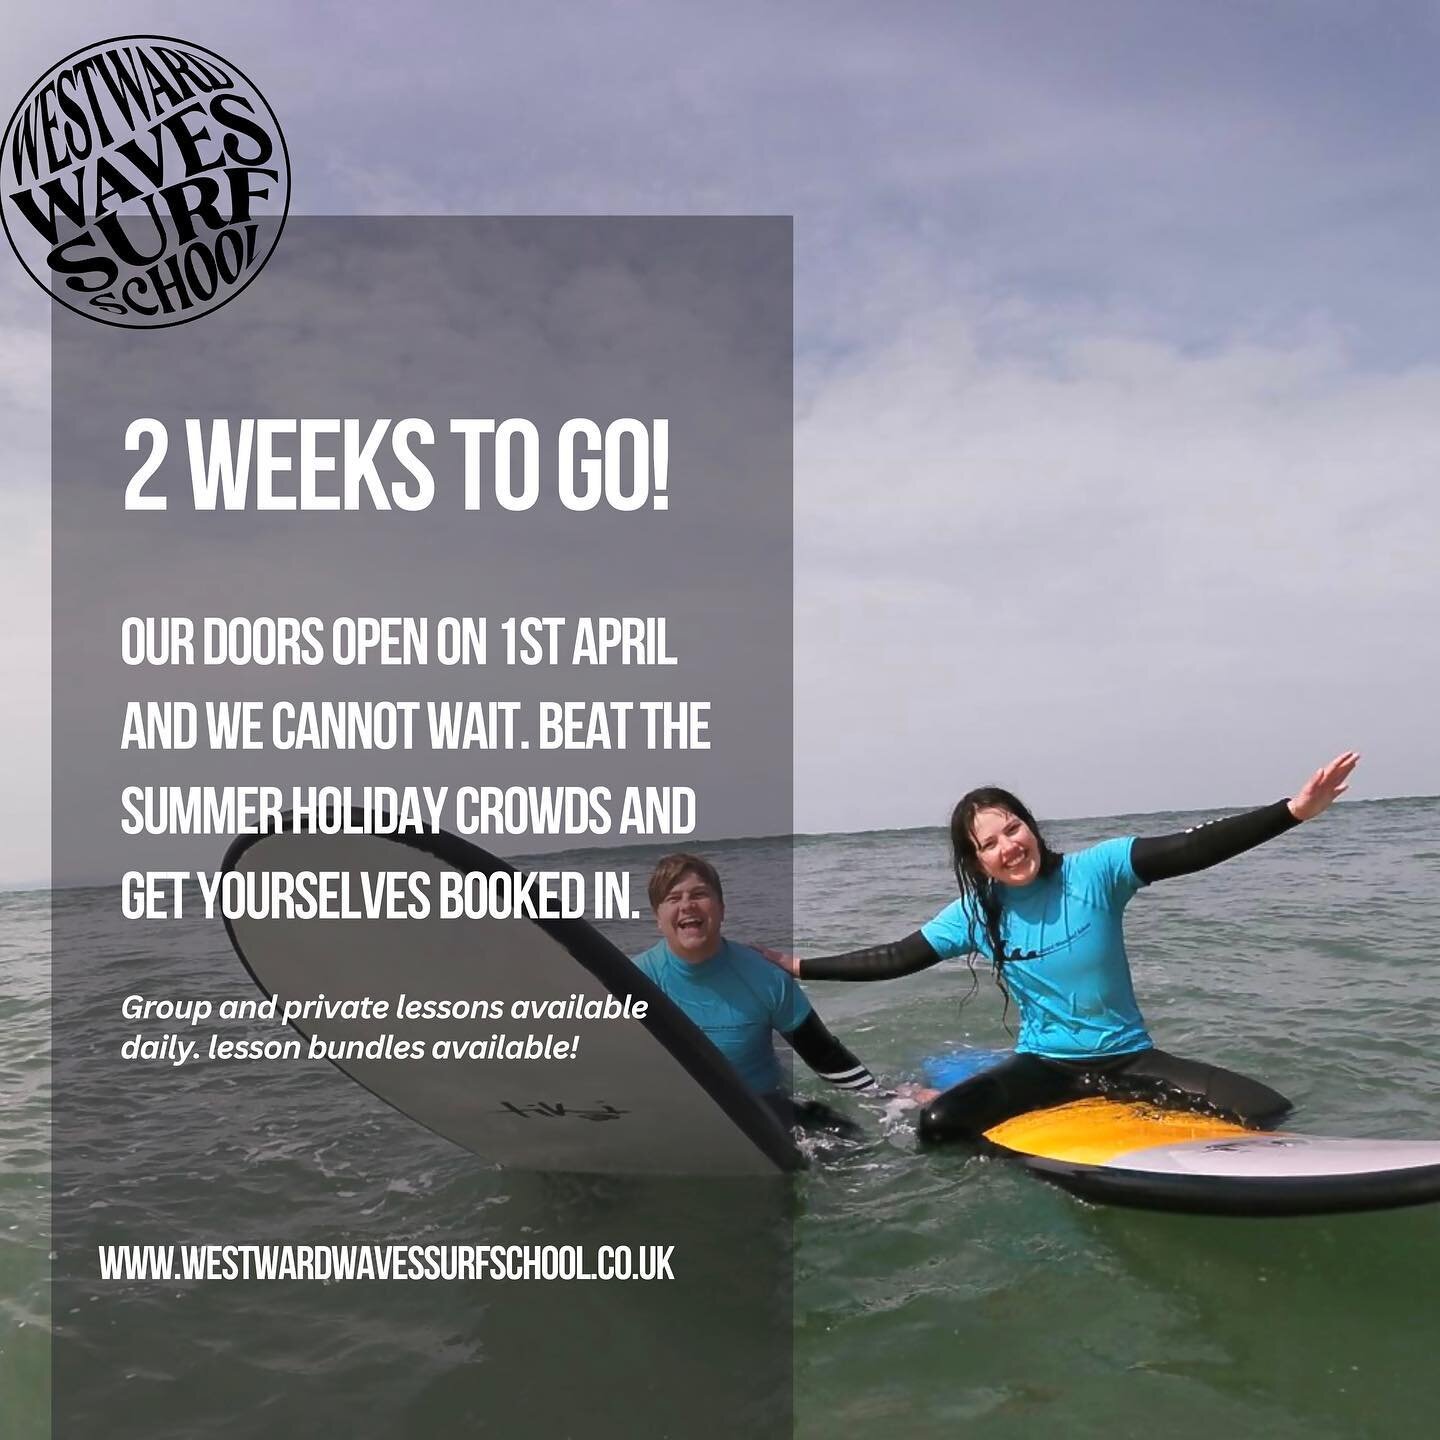 We&rsquo;re polishing off the horsebox, unpacking shiny new surfboards, hanging up the wetsuits and ramping up the stoke ahead of April 1st! 🤙 See you all soon. 
.
.
.
www.westwardwavessurfschool.co.uk
.
mark@westwardwaves.co.uk